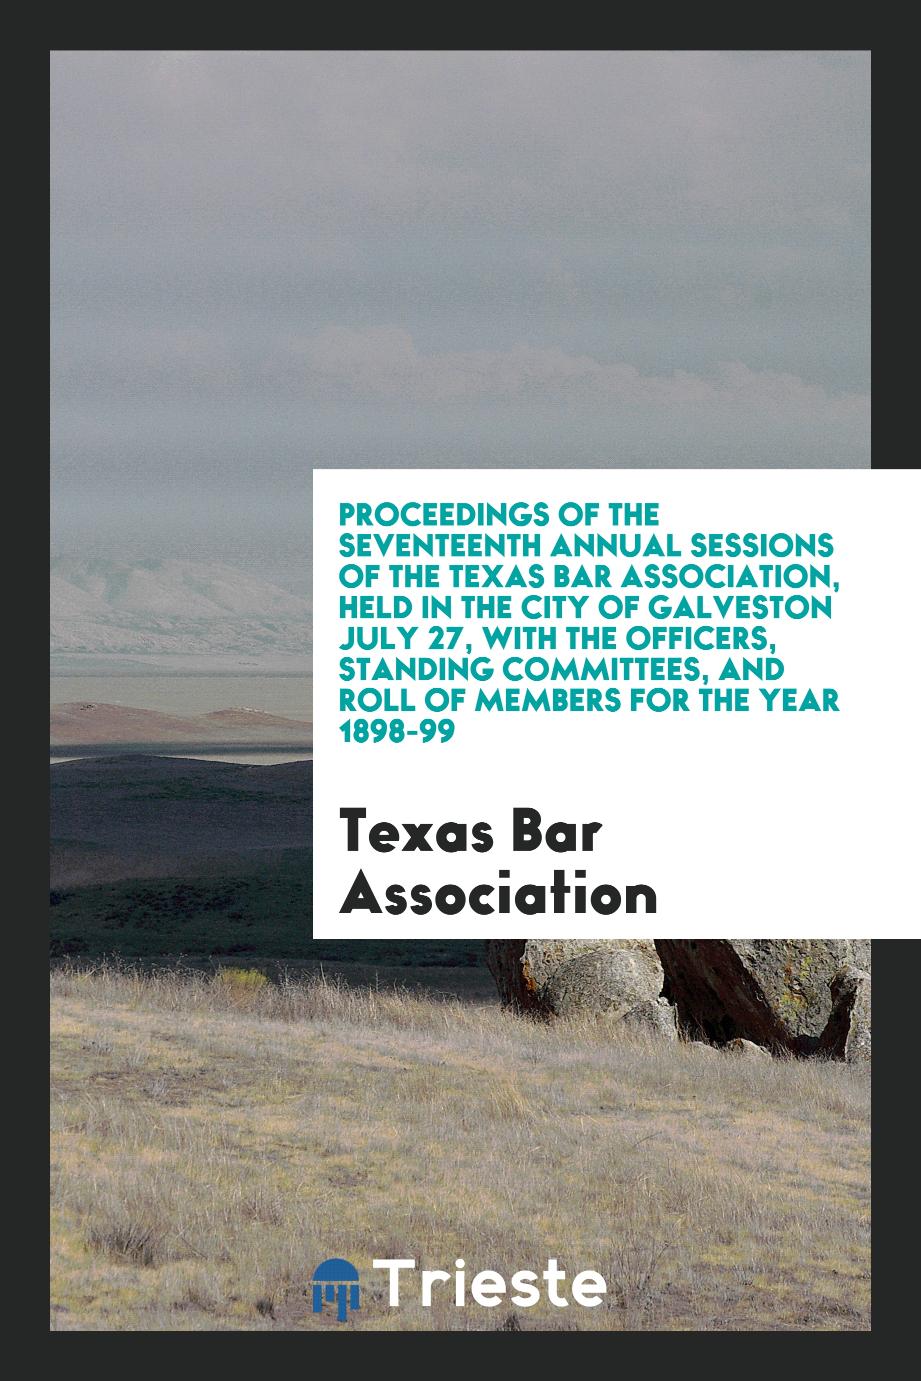 Proceedings of the Seventeenth Annual Sessions of the Texas Bar Association, Held in the City of Galveston July 27, with the Officers, Standing Committees, and Roll of Members for the Year 1898-99